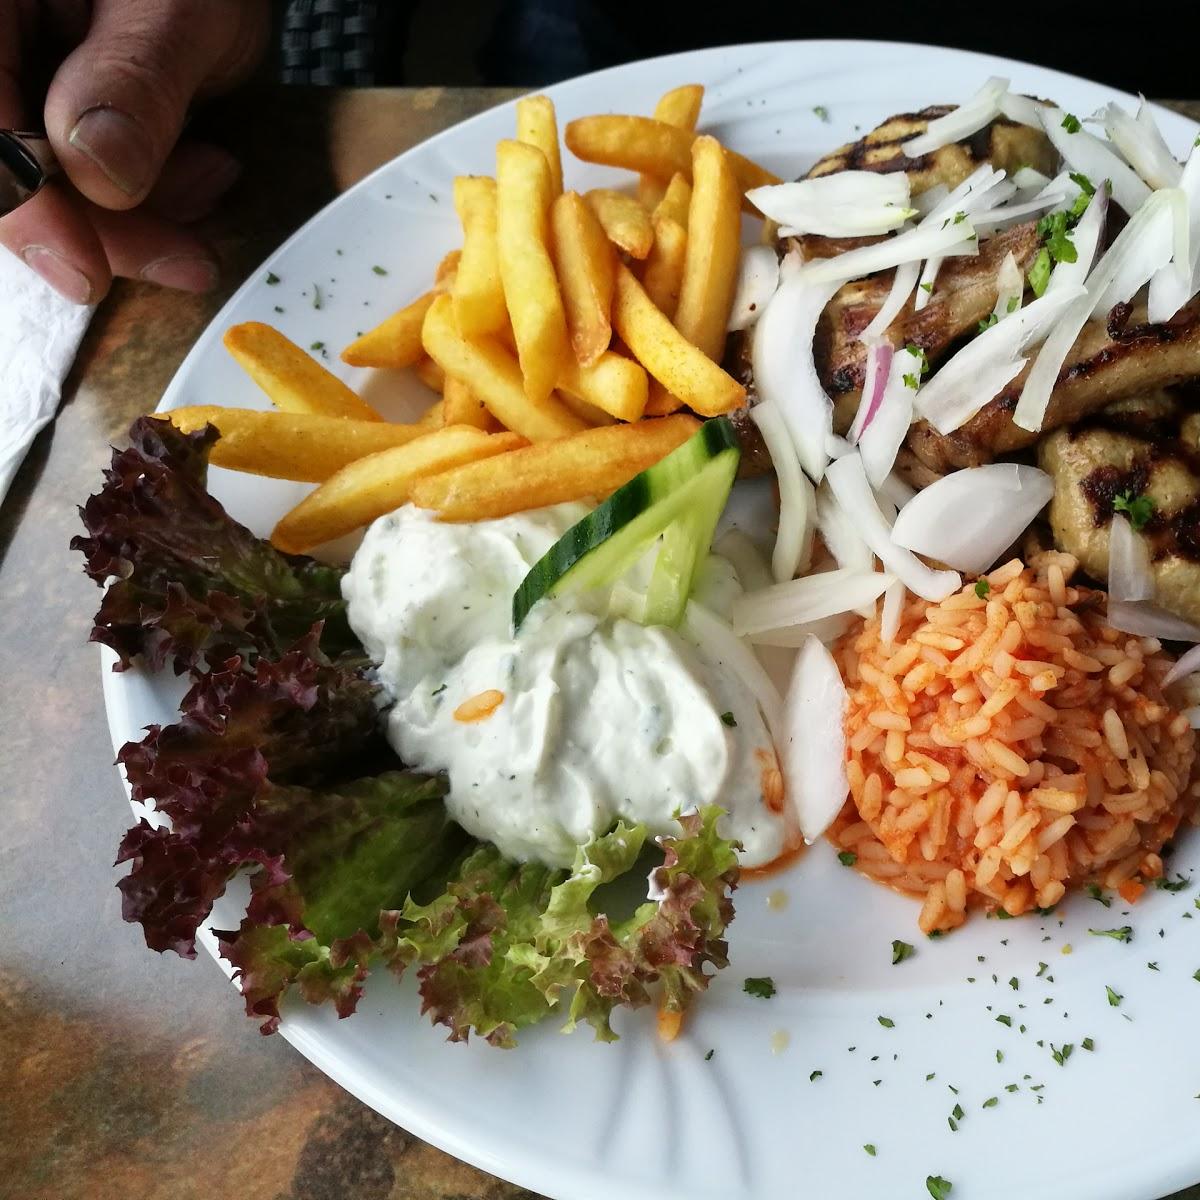 Restaurant "Azad.s Grillhaus" in  Sehnde